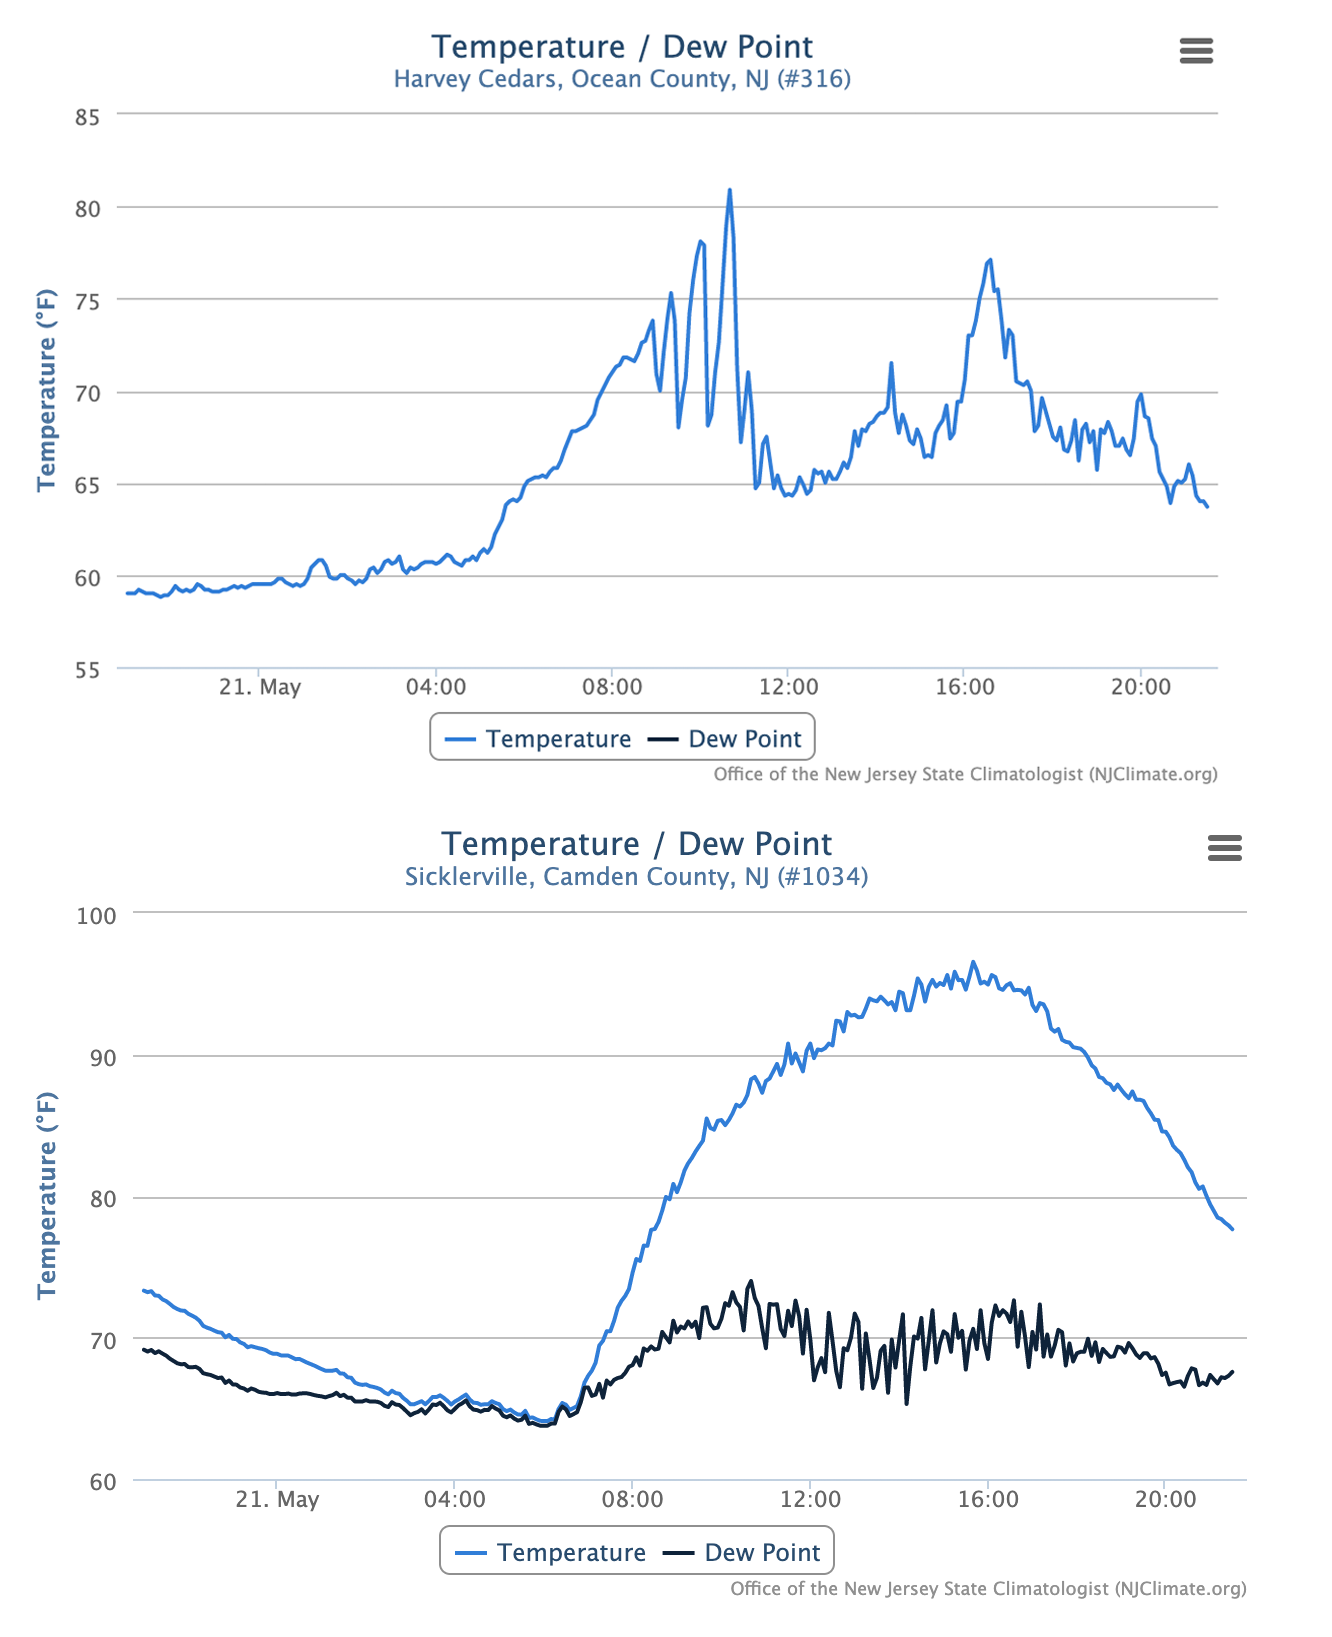 Time series of temperature and dew point temperature at Harvey Cedars (top) and Sicklerville (bottom) from 9 PM on May 20th to 9 PM on May 21st.